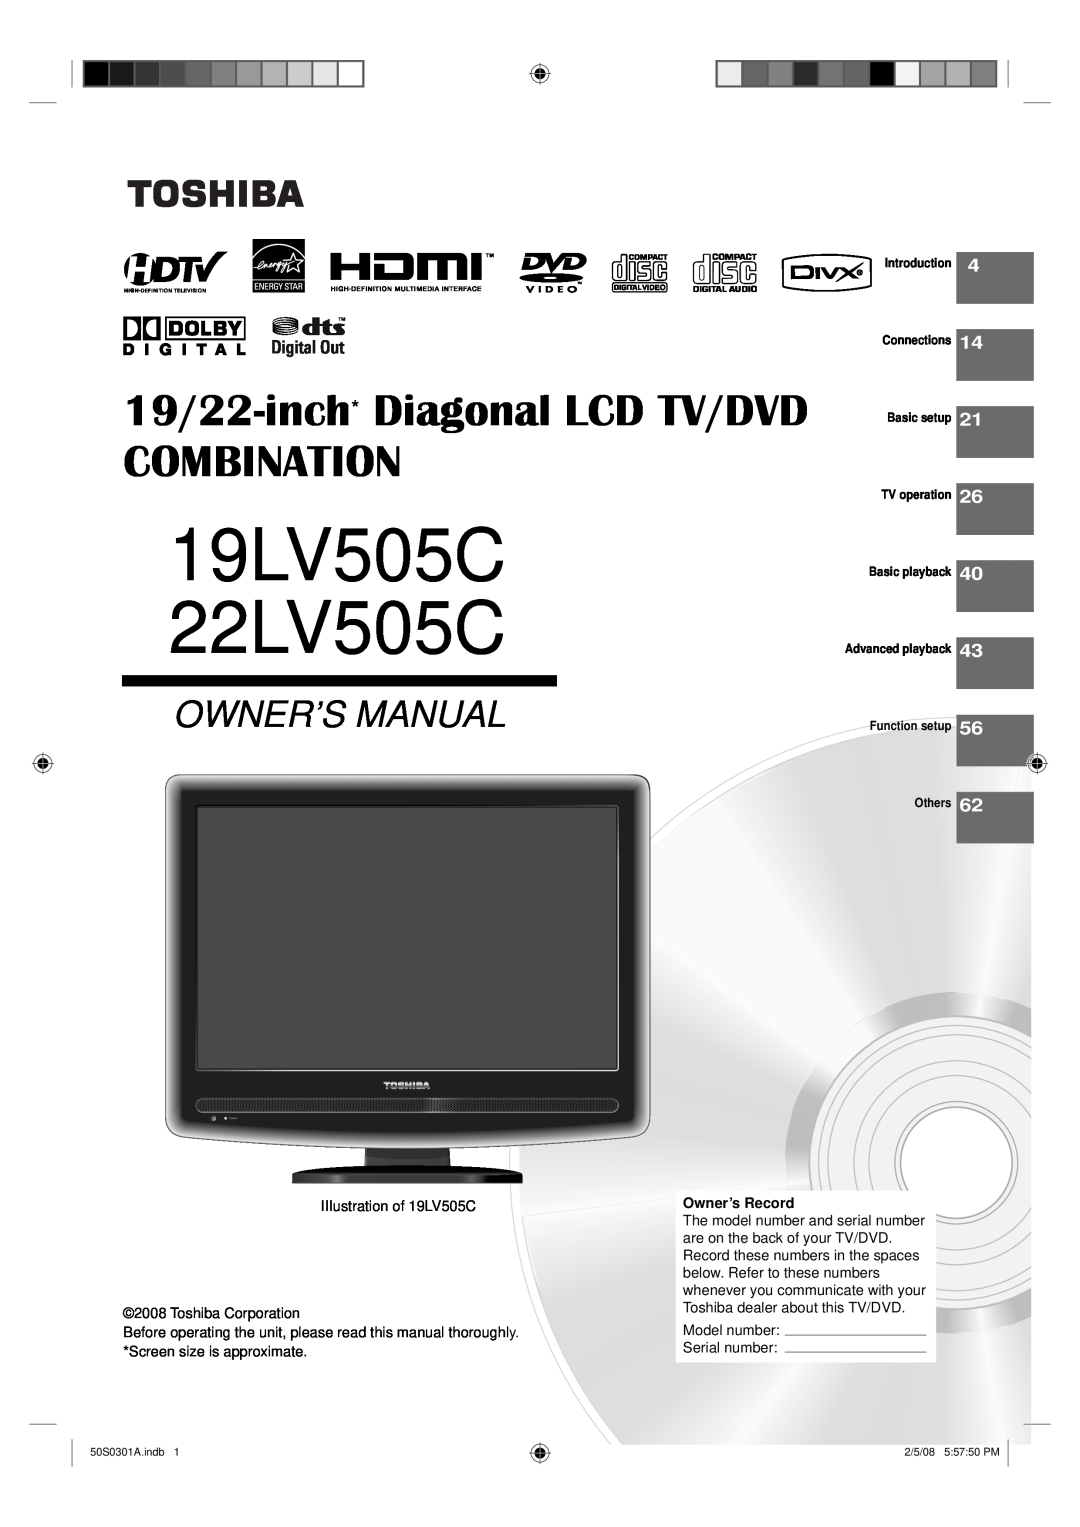 Toshiba owner manual 19LV505C 22LV505C, 19/22-inch* Diagonal LCD TV/DVD COMBINATION, Owner’S Manual, Ownerʼs Record 